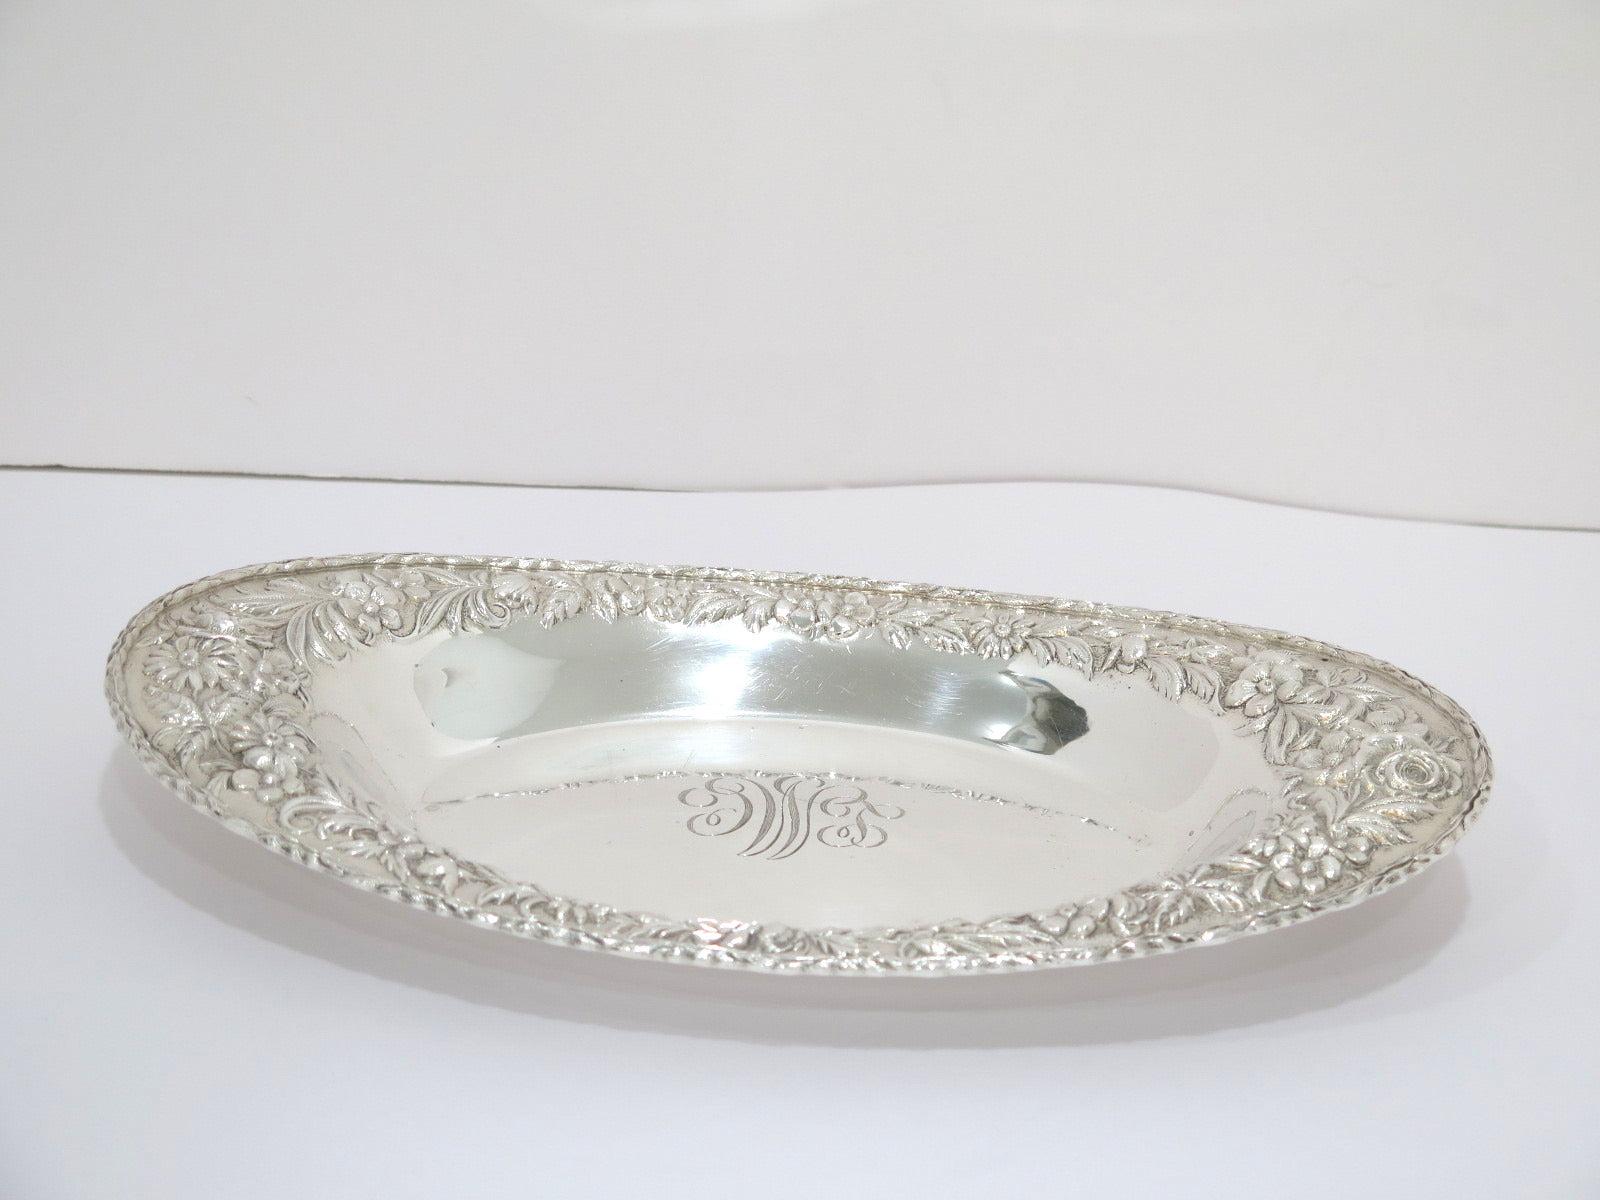 American 11.75 in - Sterling Silver S. Kirk & Son Antique Floral Repousse Oval Dish